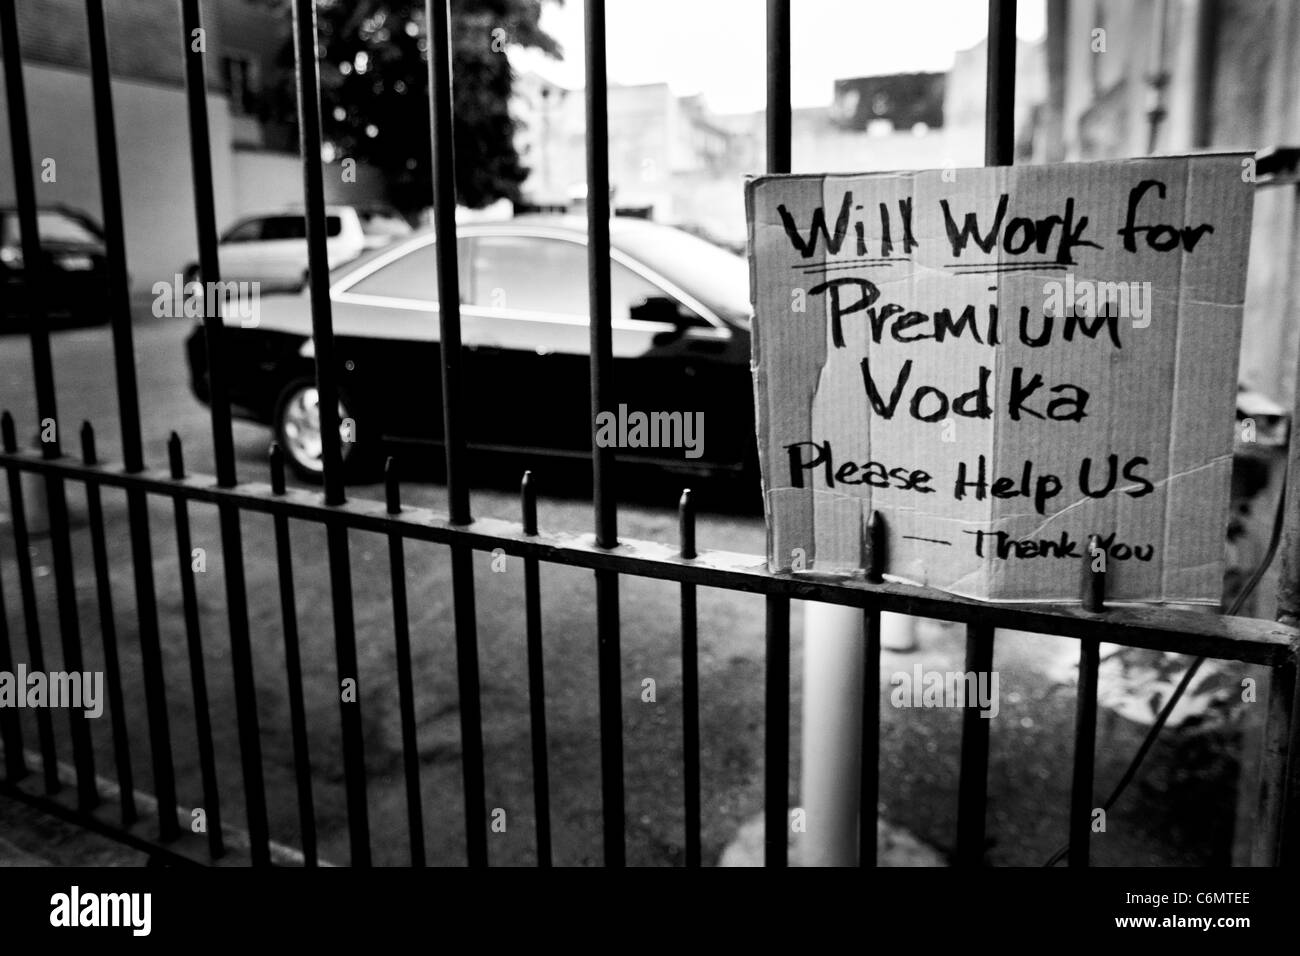 A homeless person's sign.  Image was taken in New Orleans Stock Photo